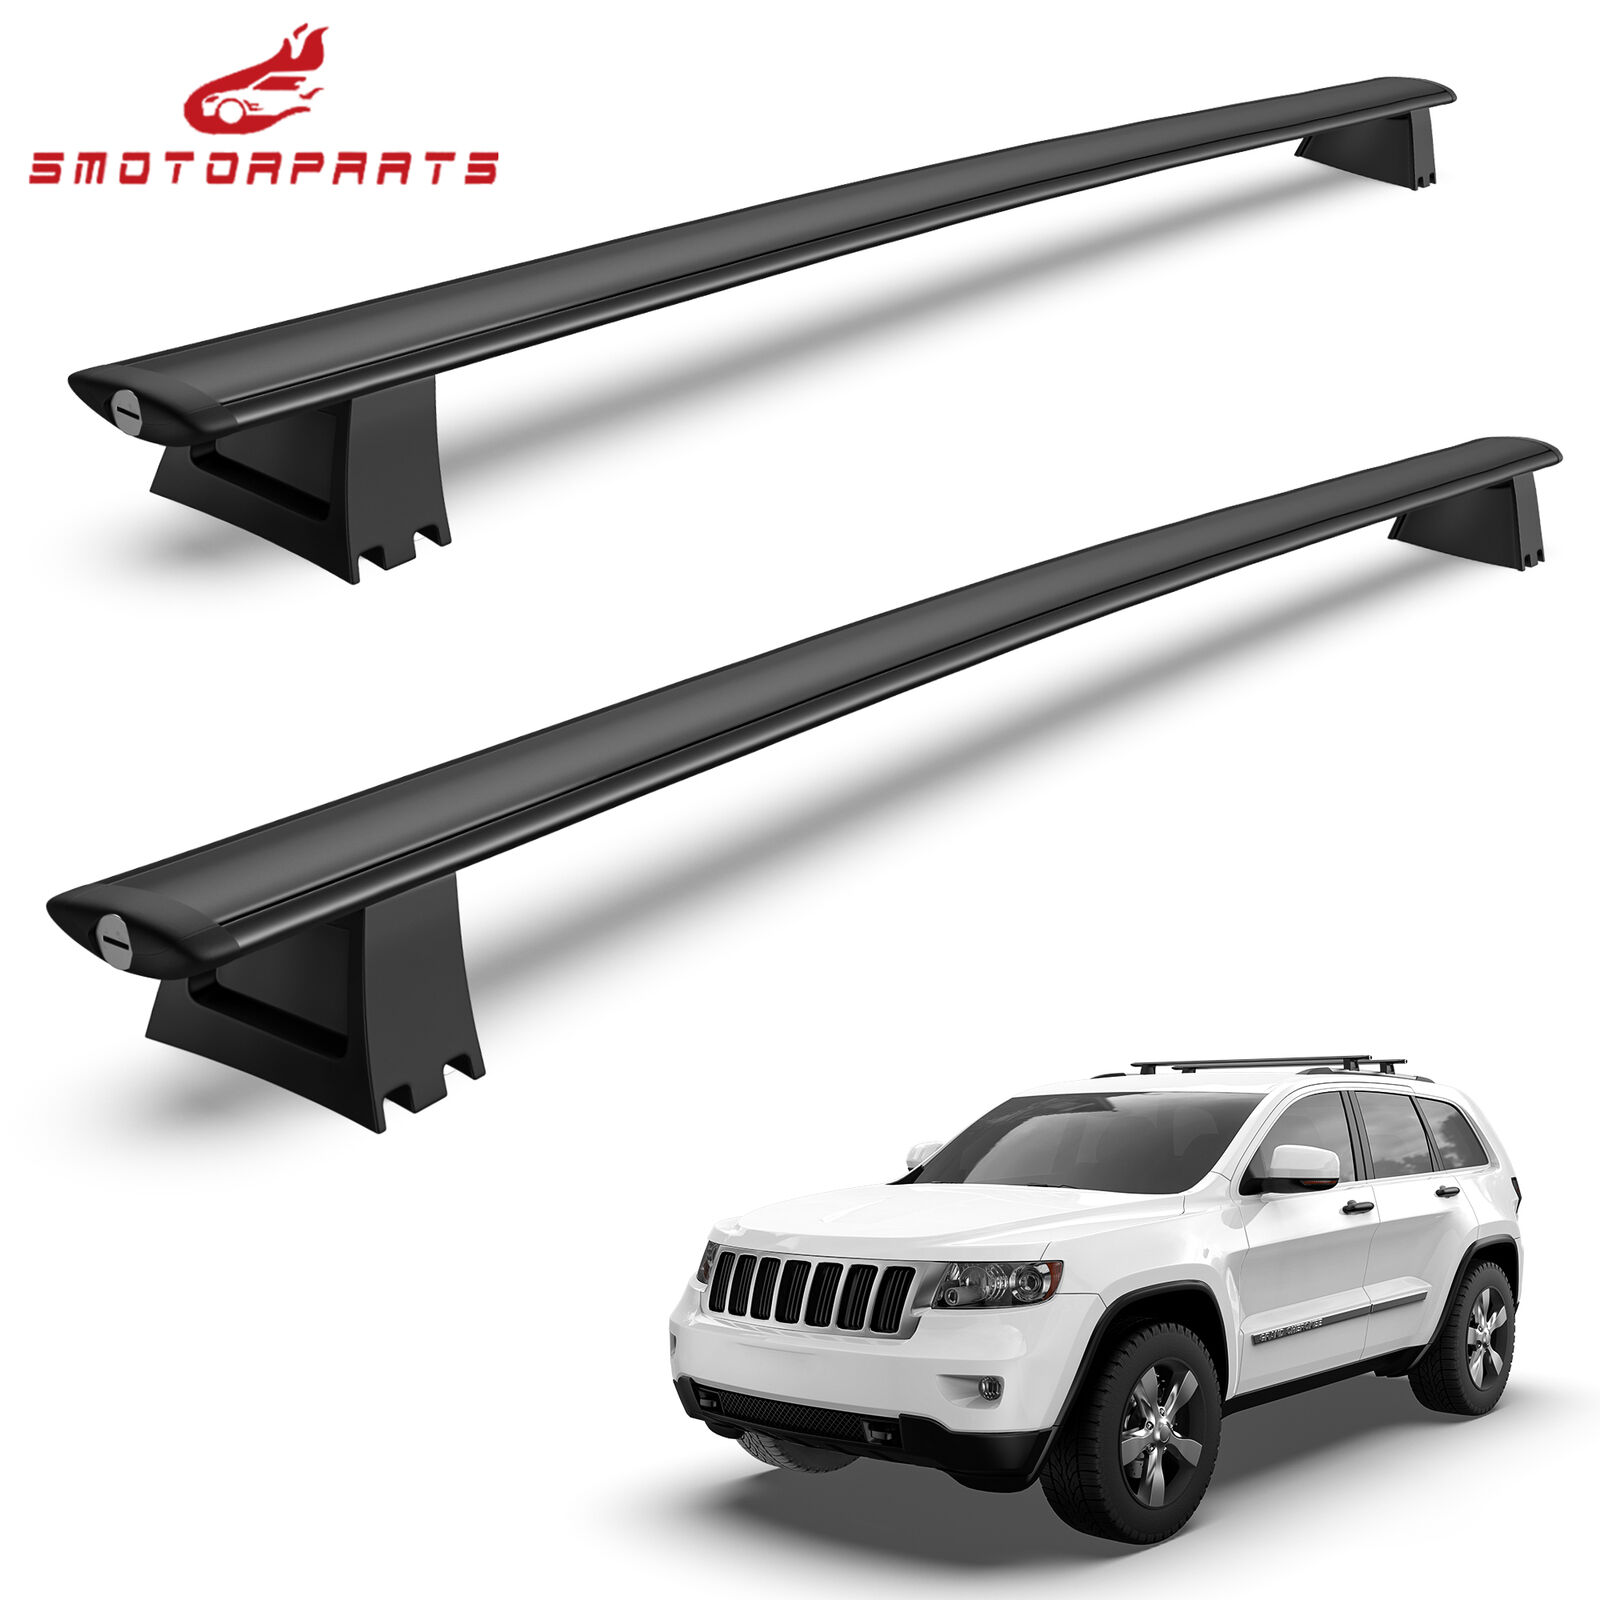 Roof Rack Cross Bars Luggage Carrier For 11-21 Jeep Grand Cherokee W/ Side Rails